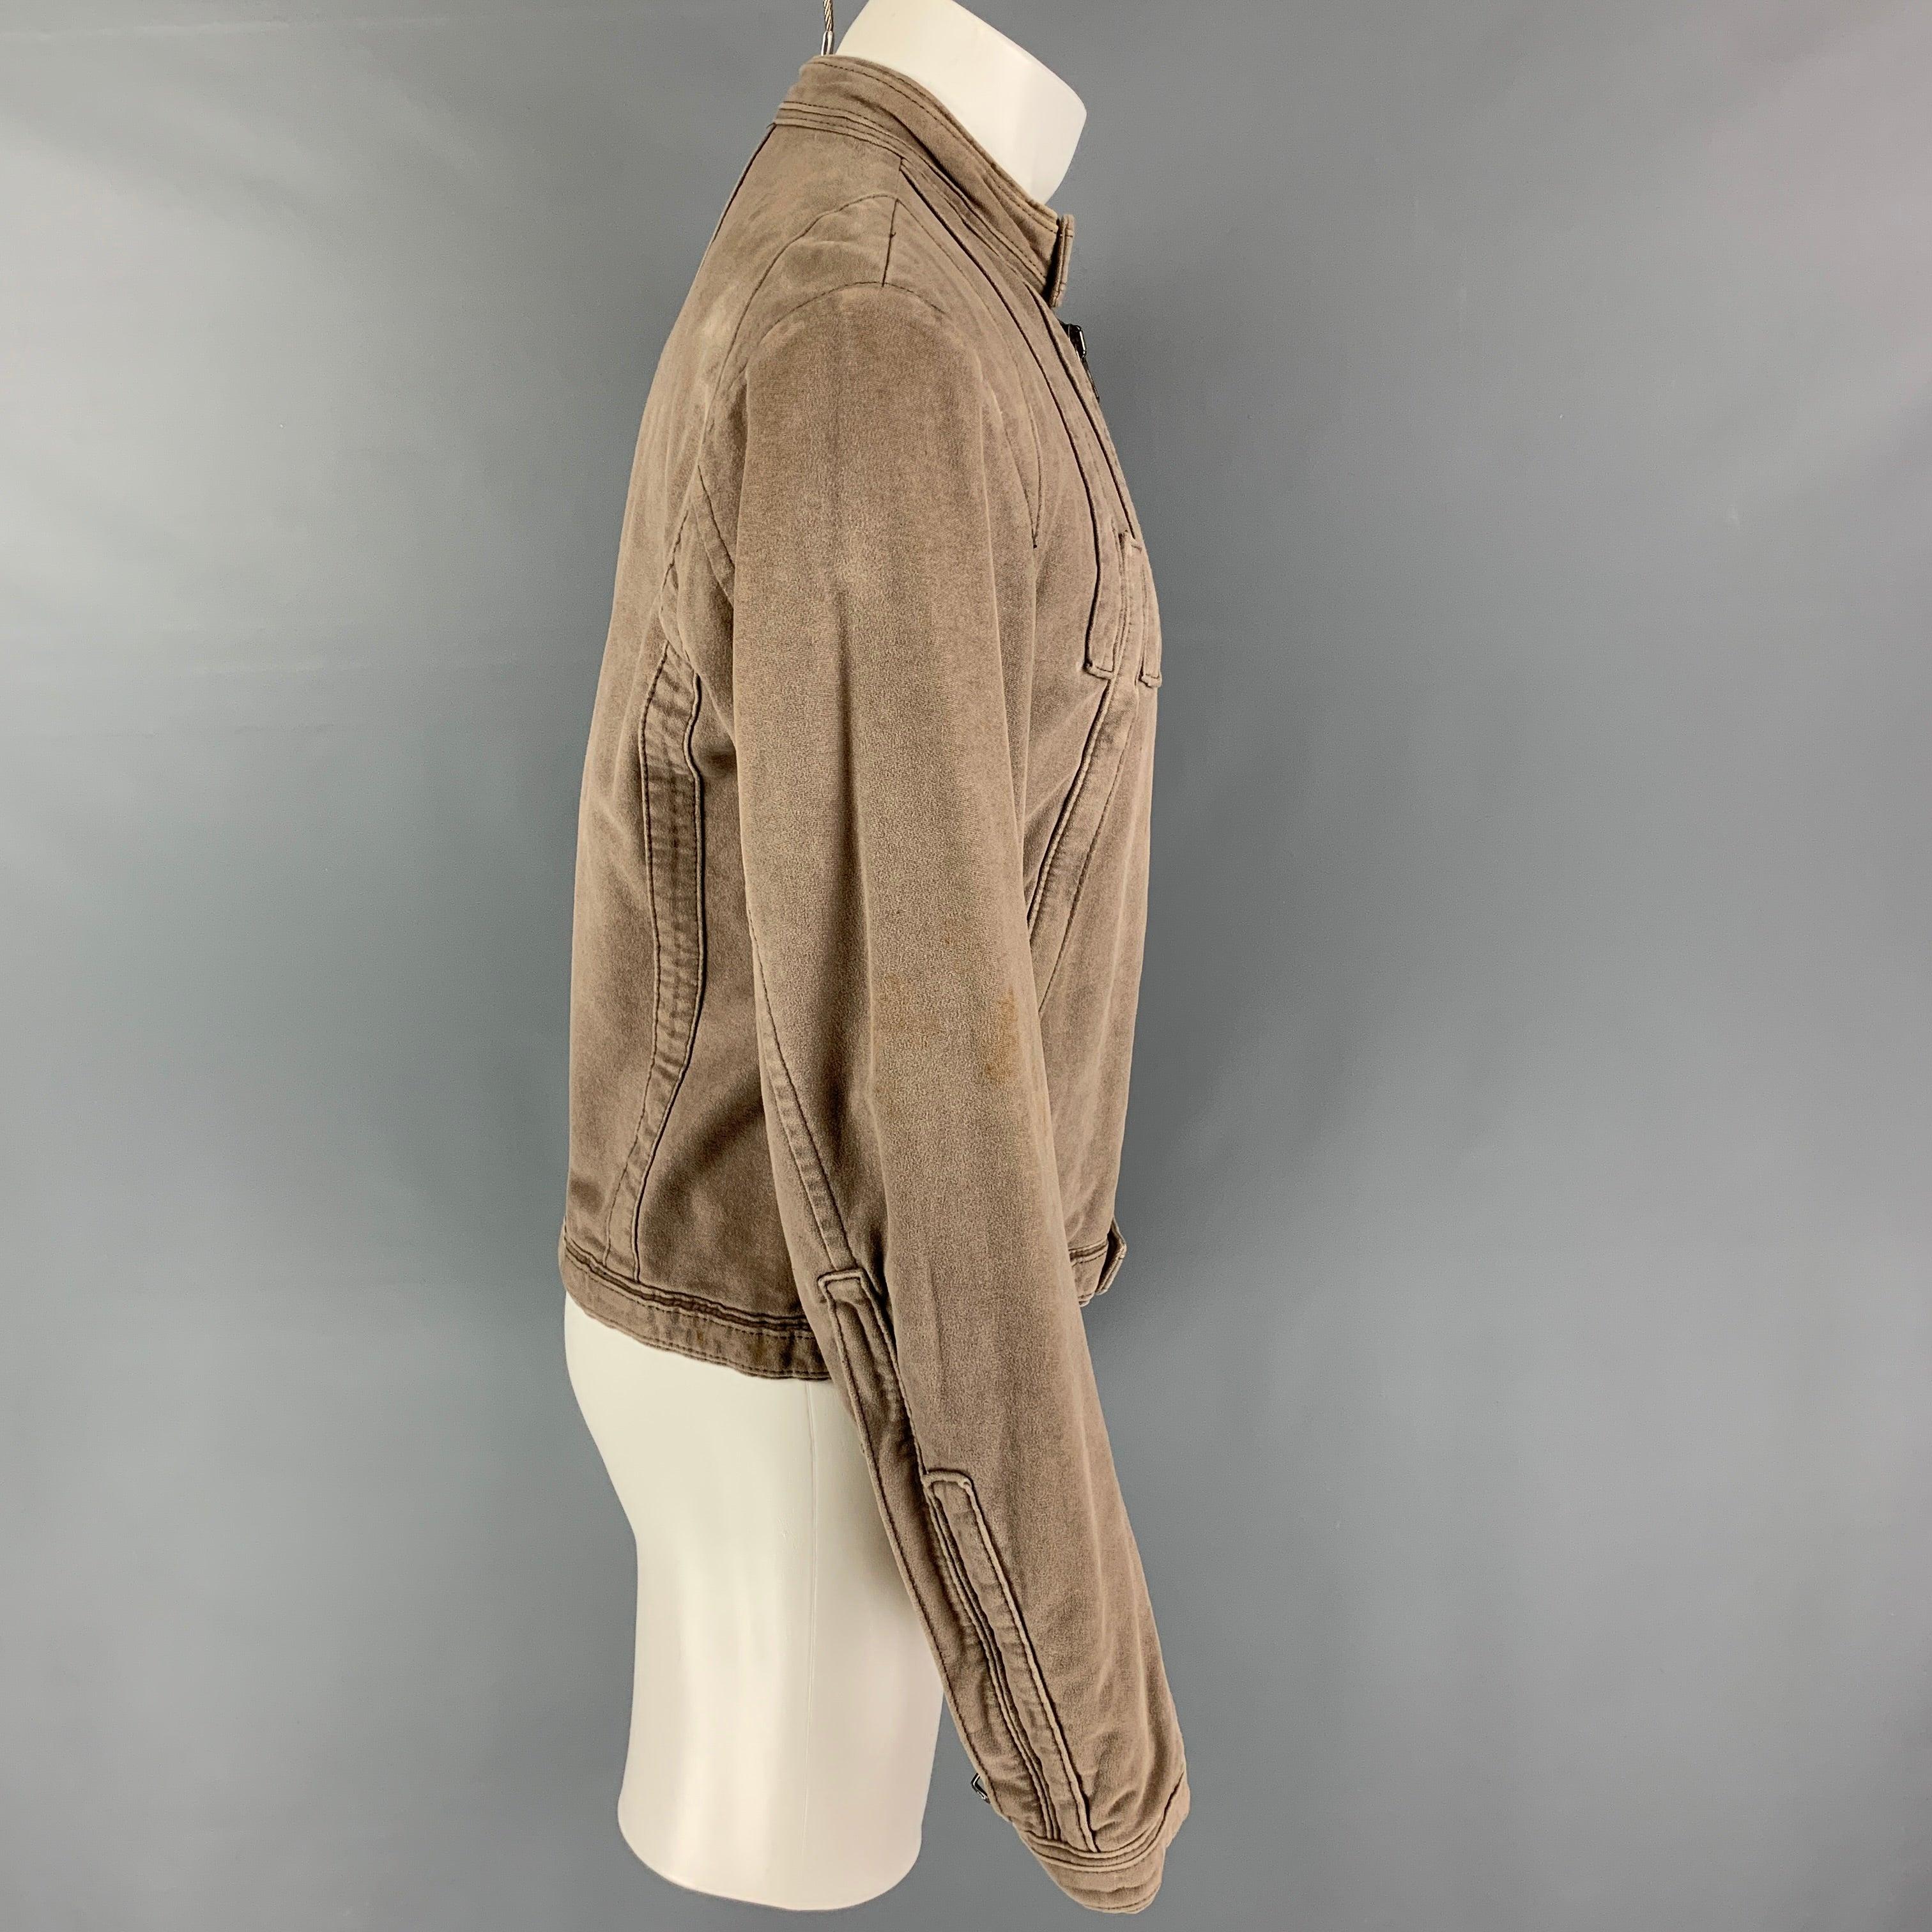 DSQUARED2 jacket comes in a taupe moleskin featuring a snap button collar, top stitching, zipper pockets, zipped sleeves, and a full zipper closure. Made in Italy.
Good
Pre-Owned Condition. Moderate discoloration. As-is.  

Marked:   50